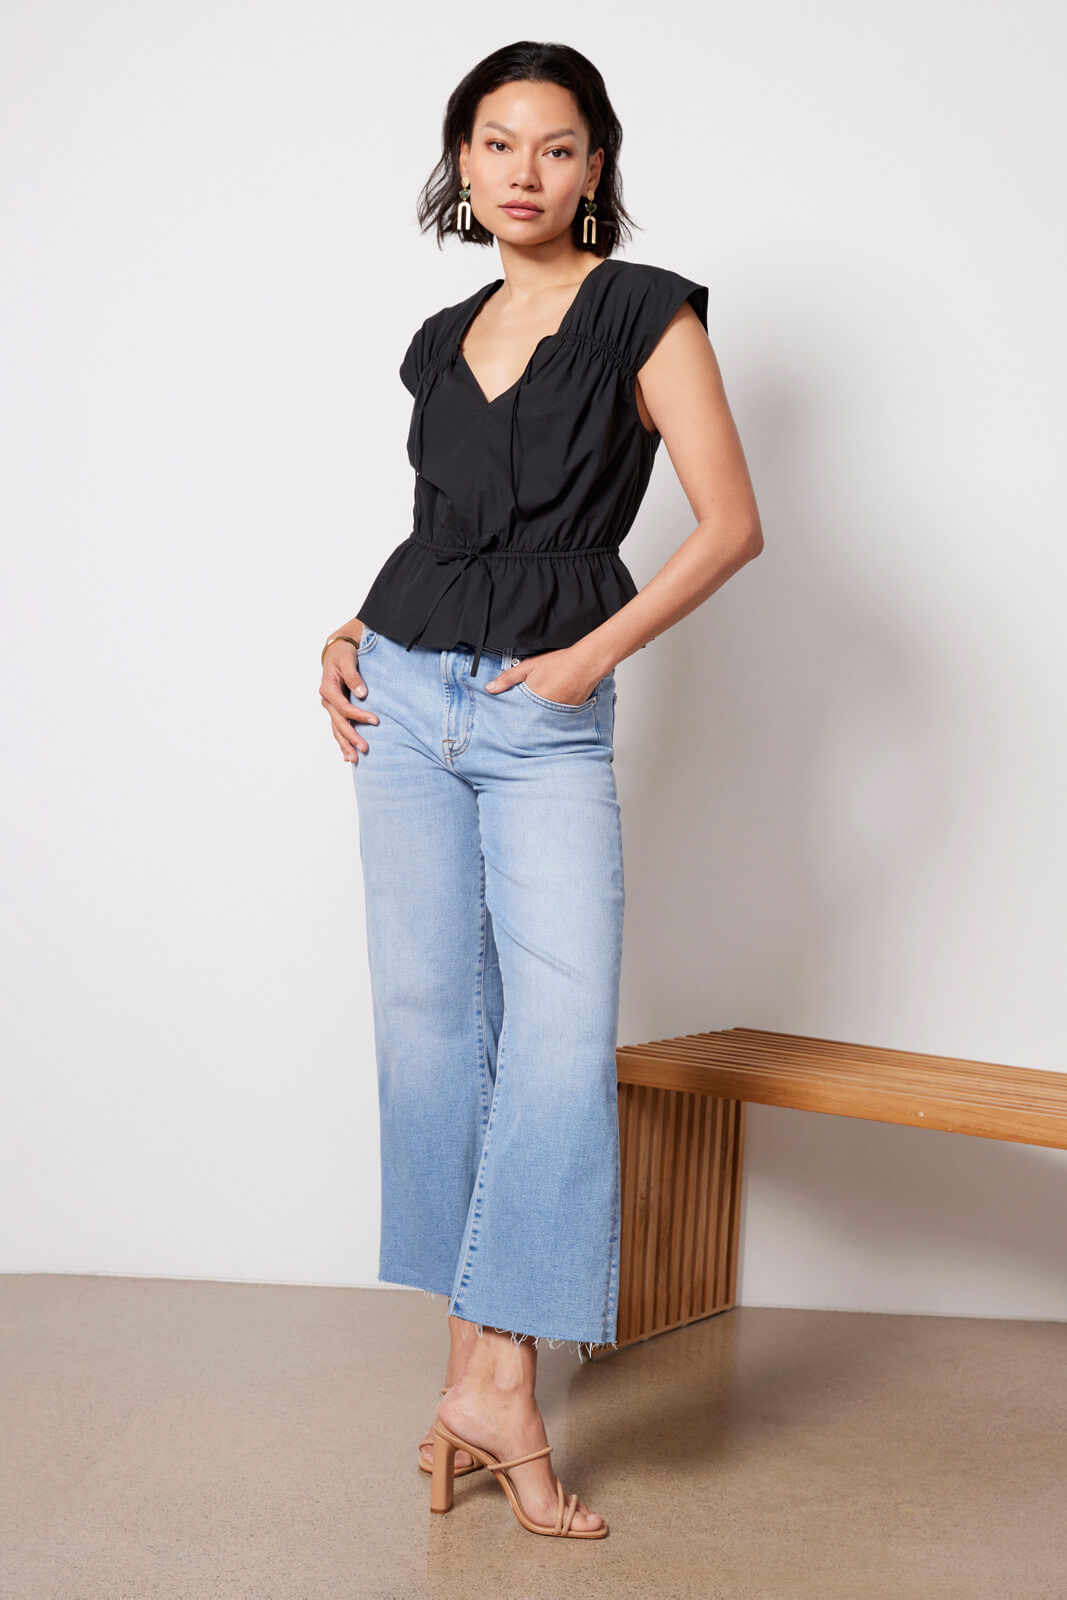 Model wearing black Savi top with denim flare jeans and nude heels.